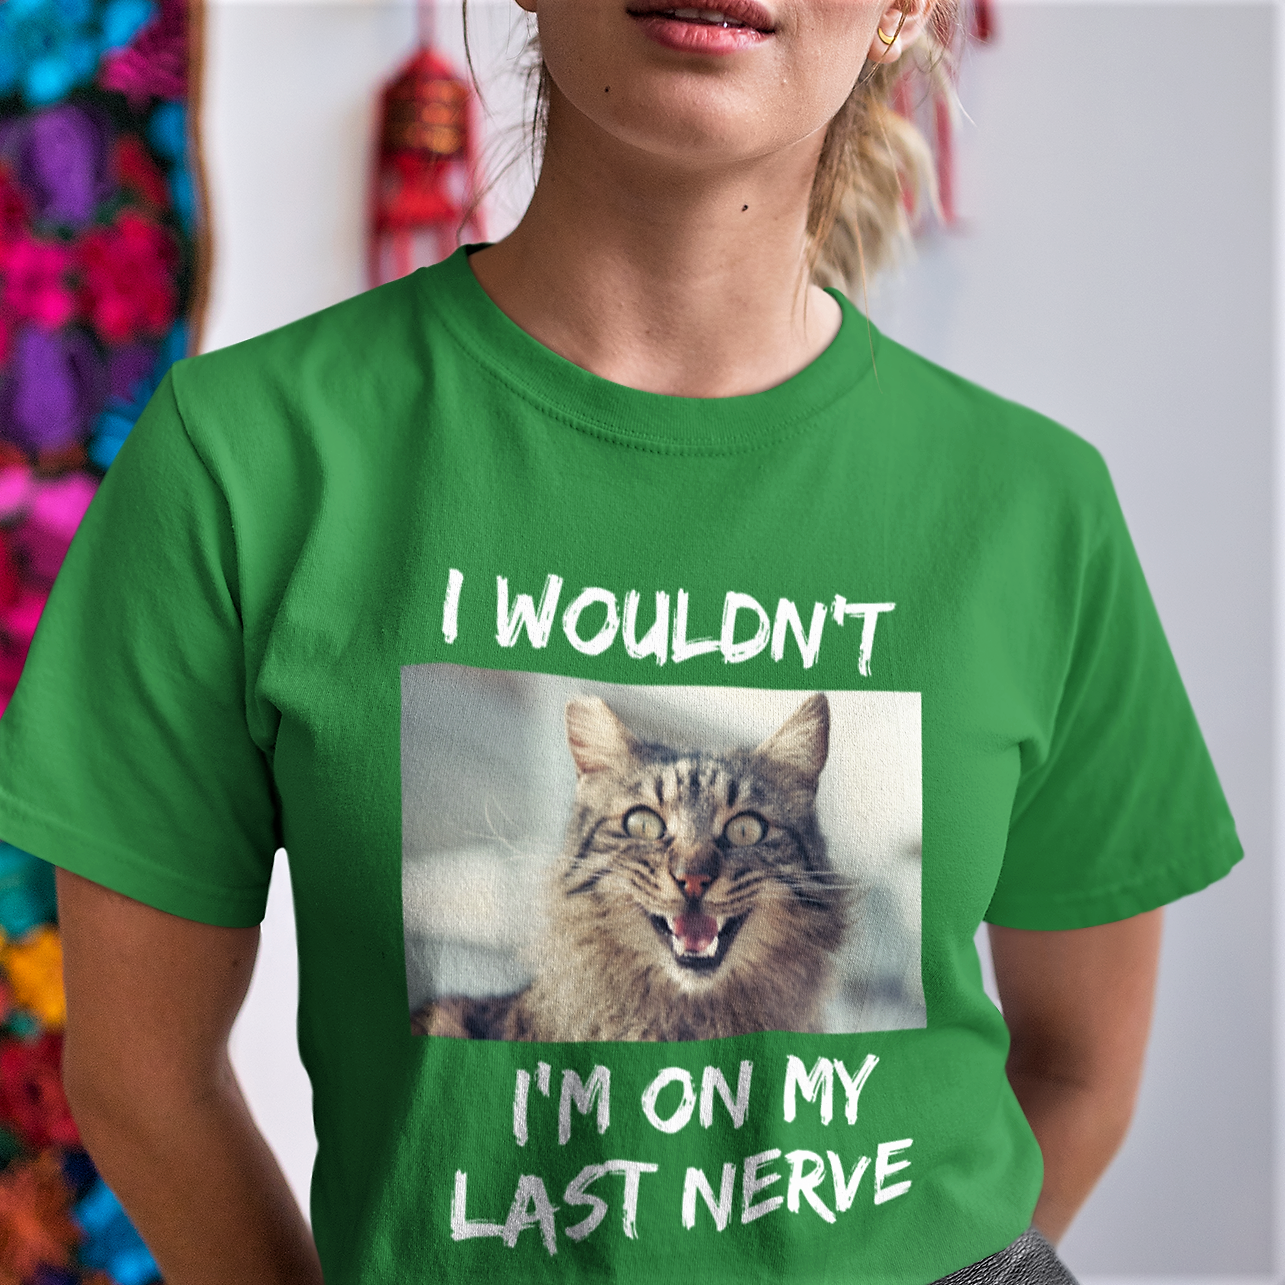 green t-shirt with frazzled cat picture with phrase I Wouldn't, I'm on my last nerve